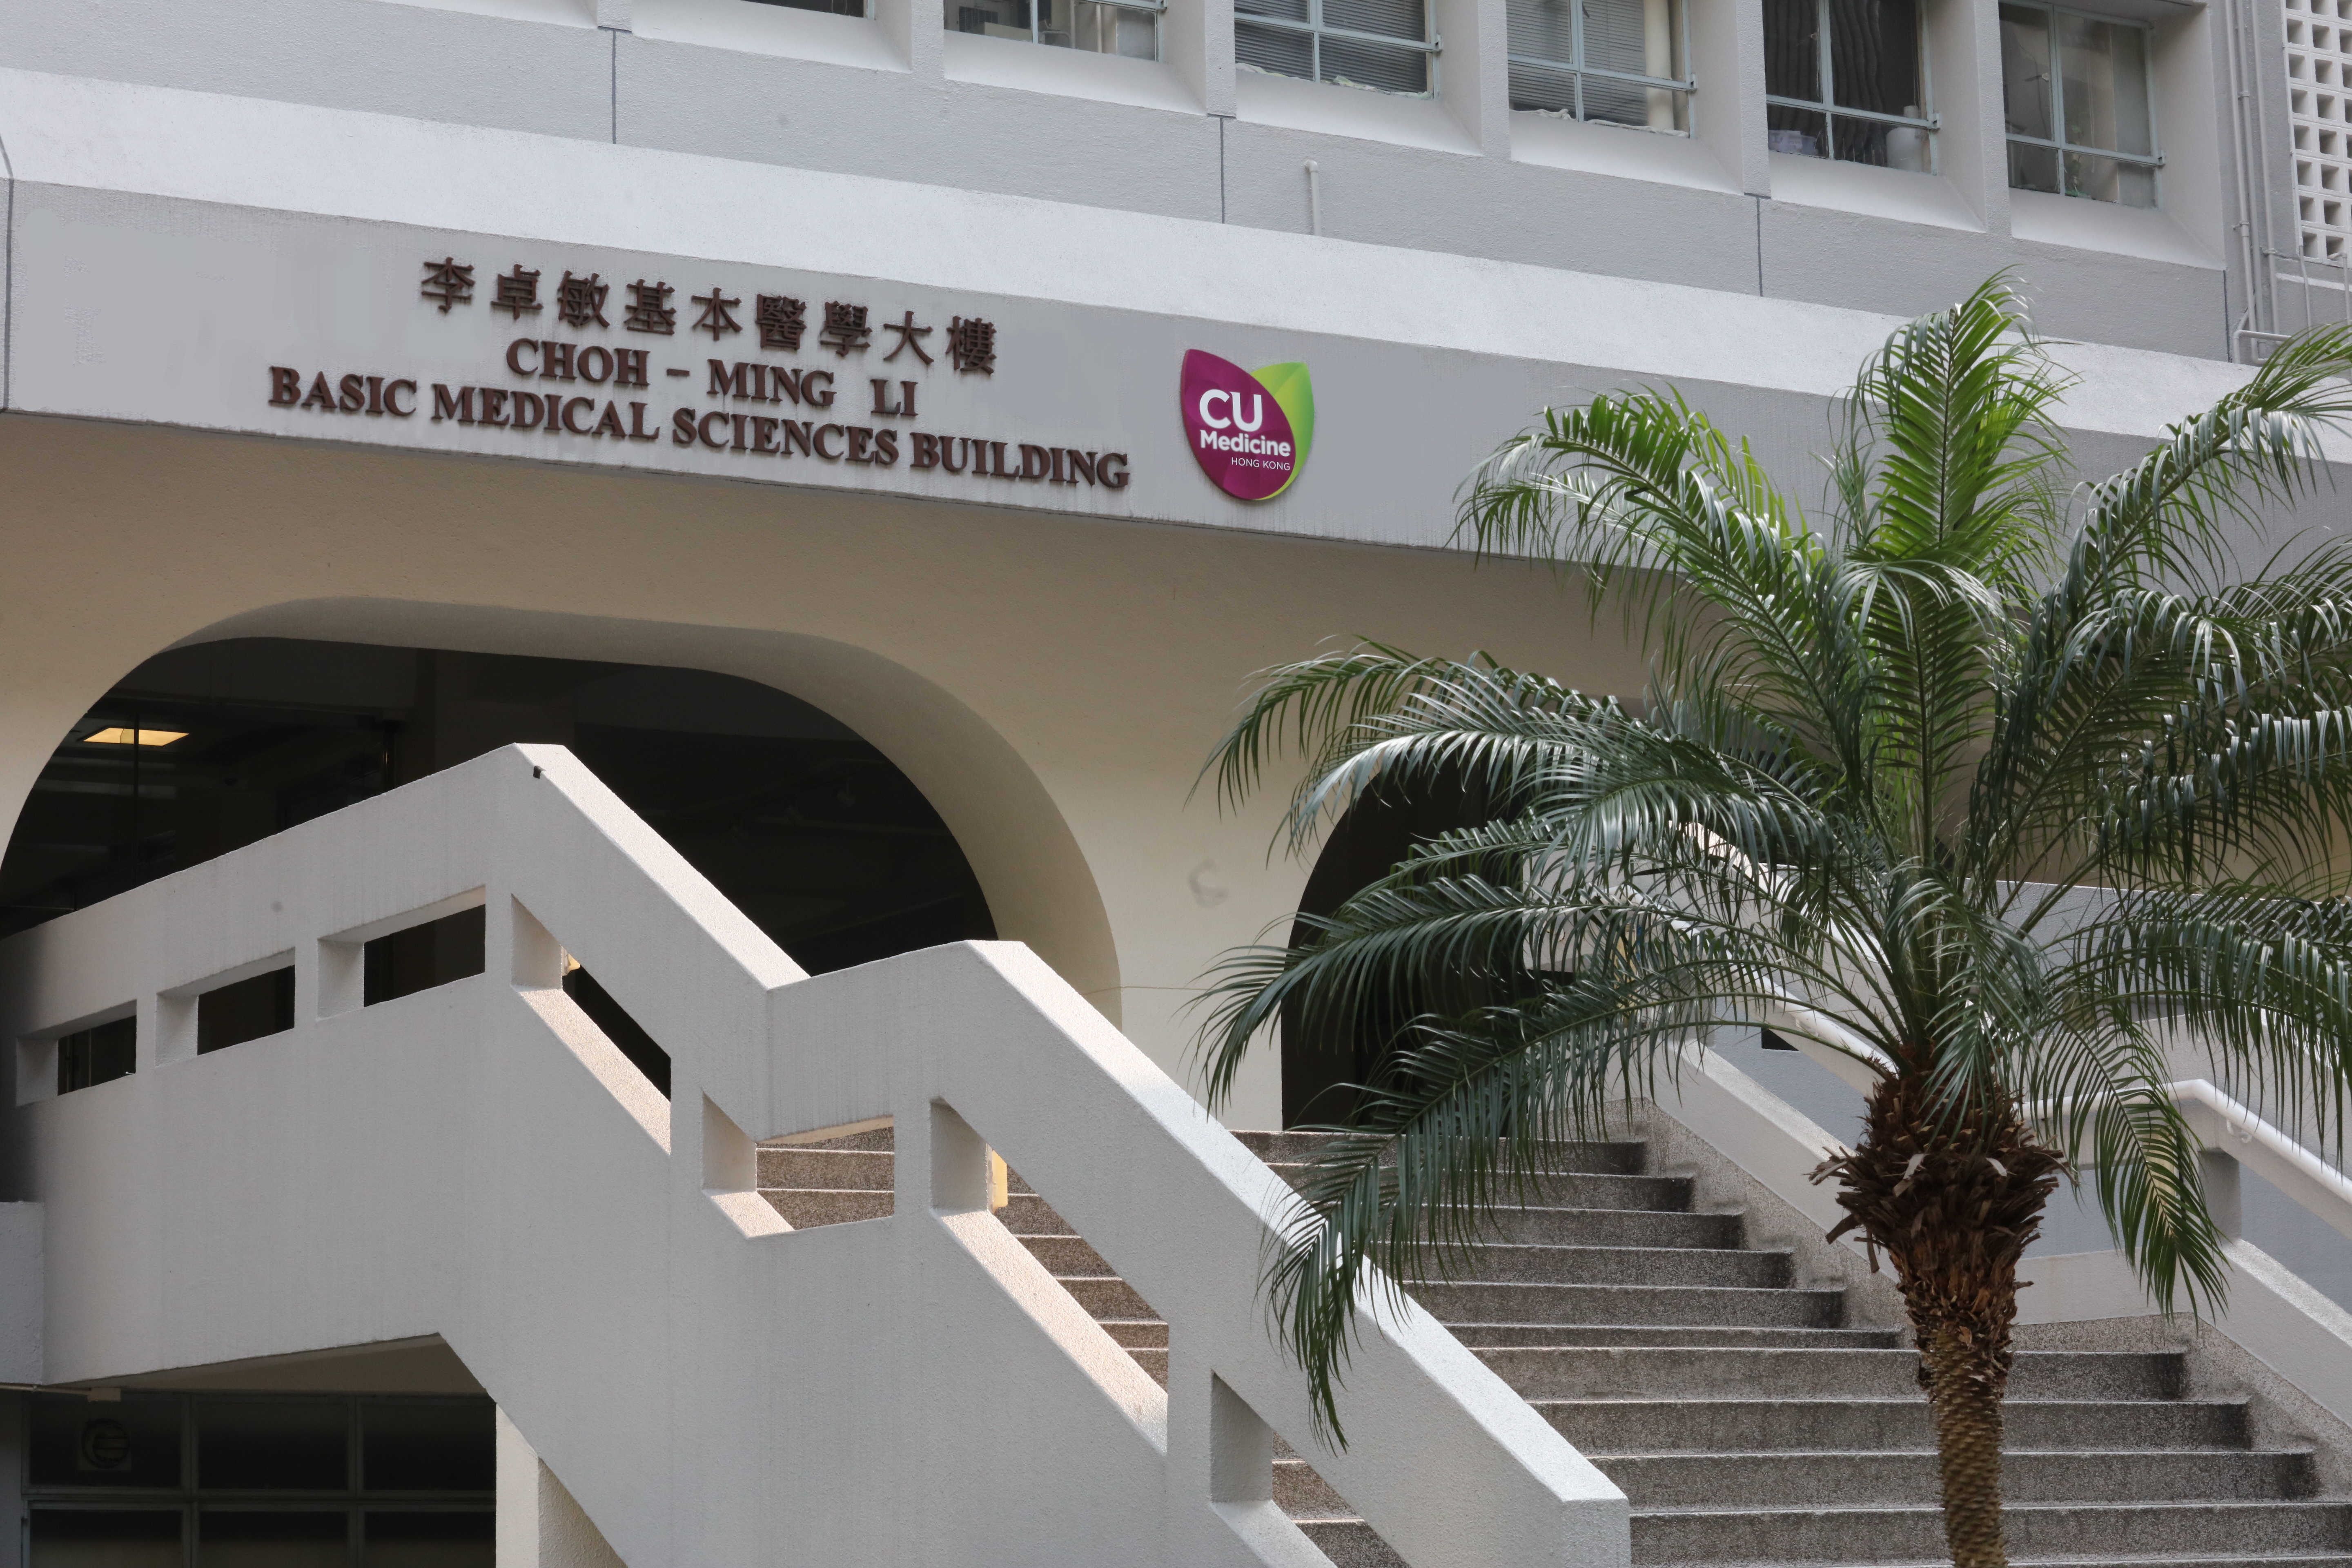 Over 60% of students who are admitted to the Medicine programmes via JUPAS in Hong Kong this year chose to study at CUHK Medicine, including seven students who score 5** in seven subjects or above in this year’s DSE examination.